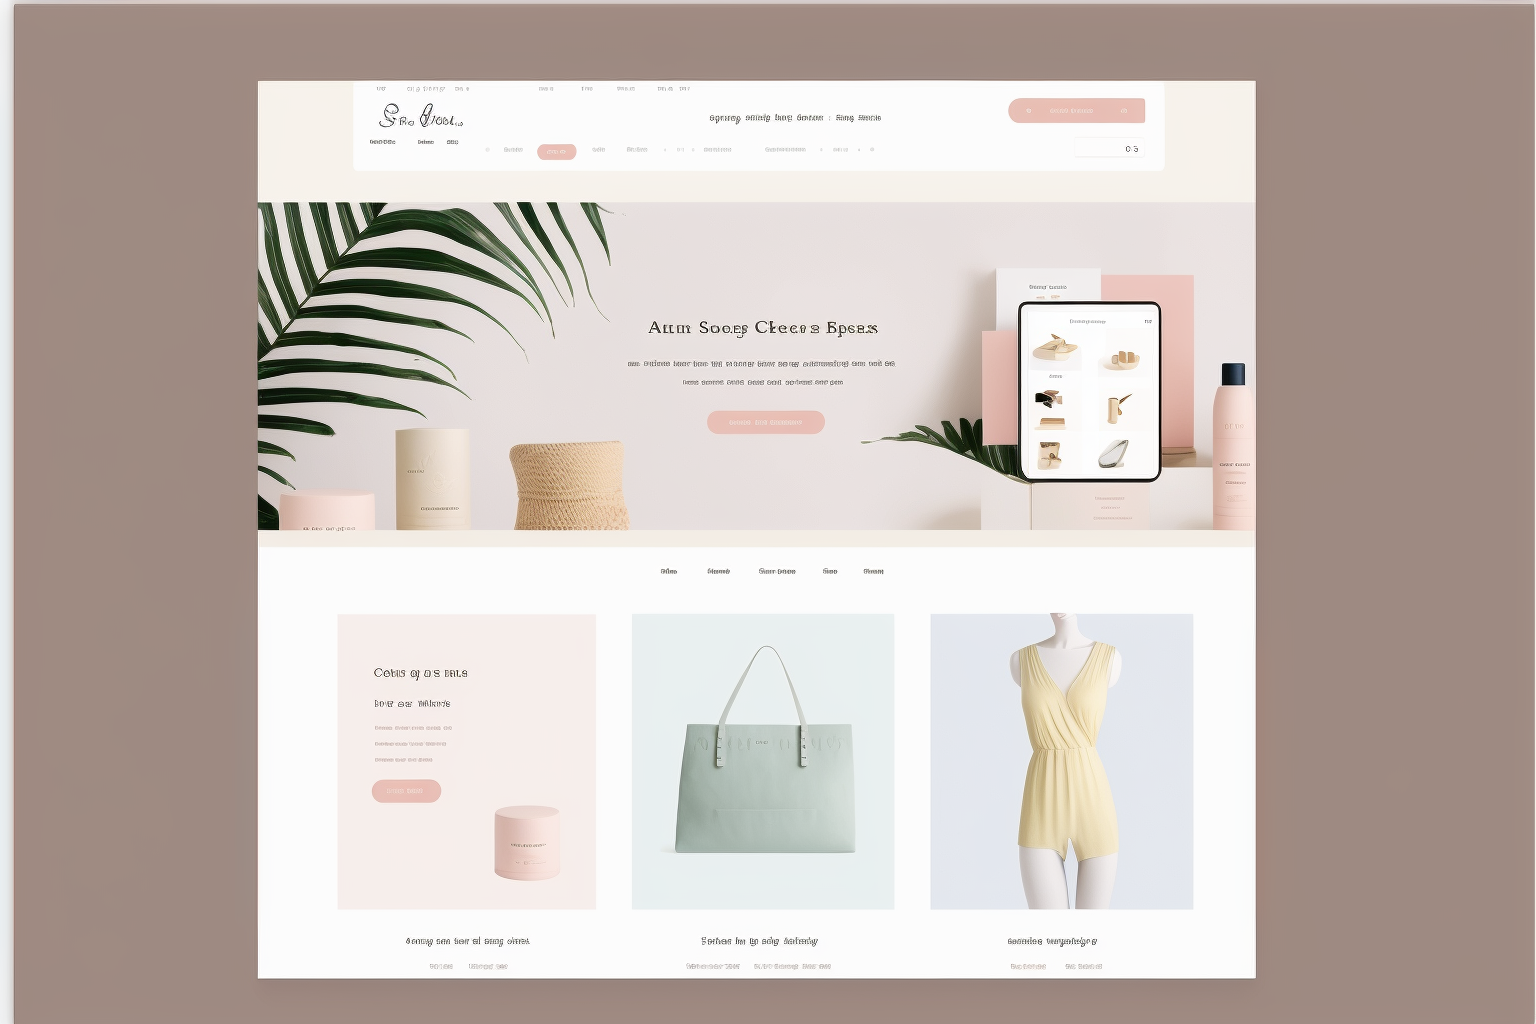 Example shopify site